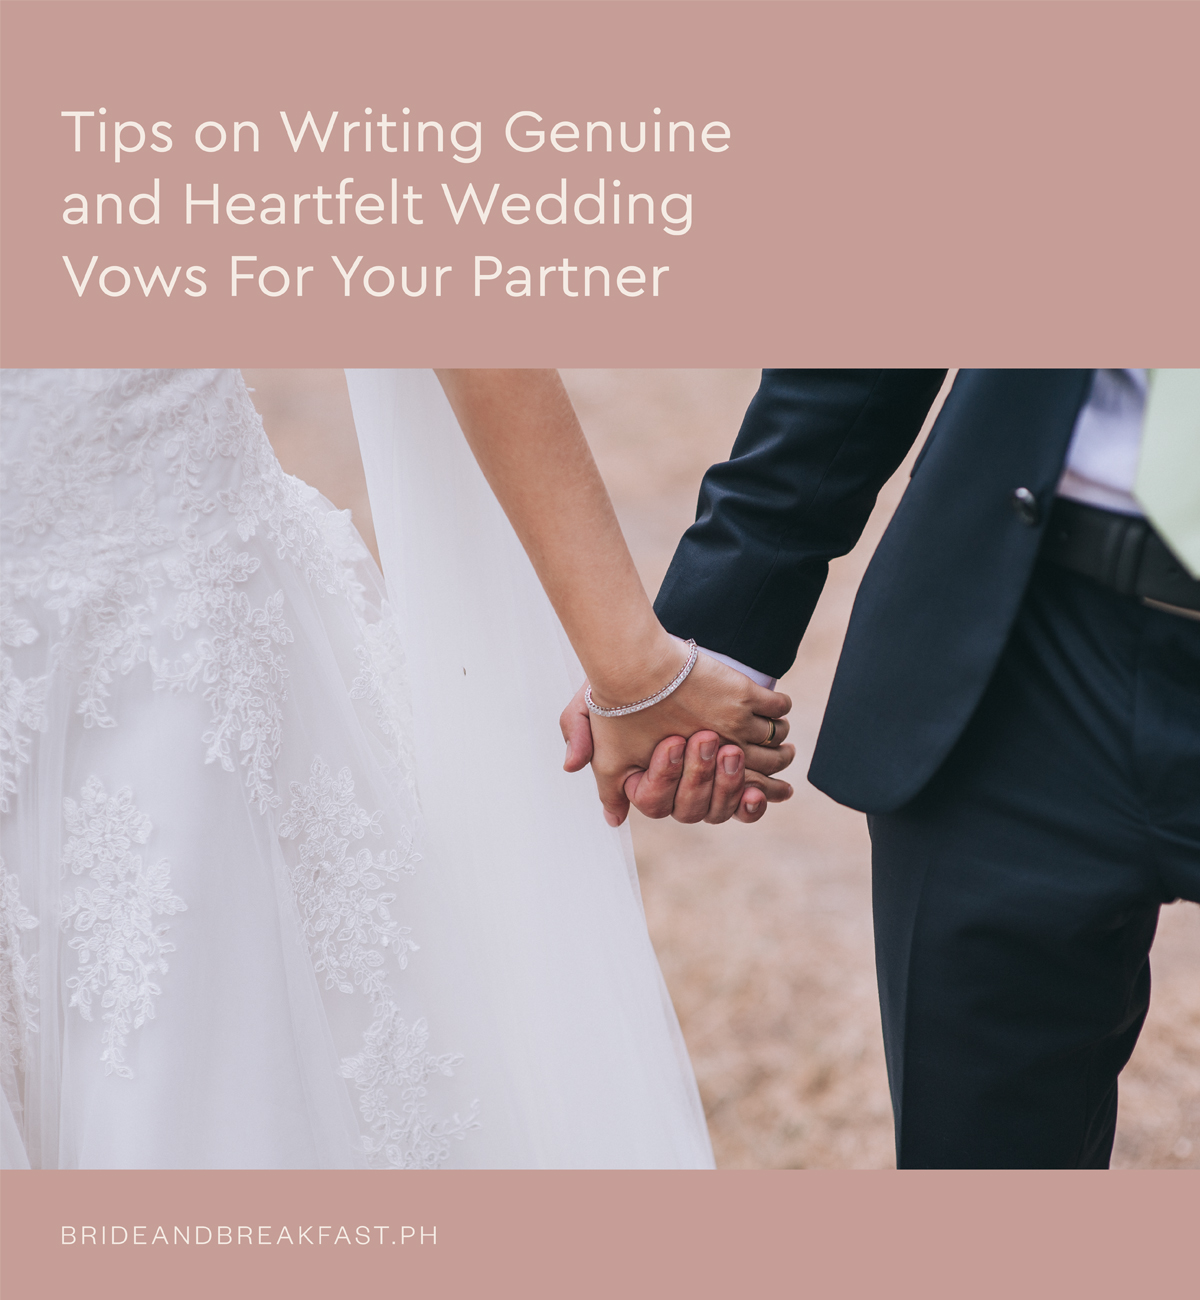 Tips on Writing Heartfelt and Genuine Wedding Vows For Your Partner Cover